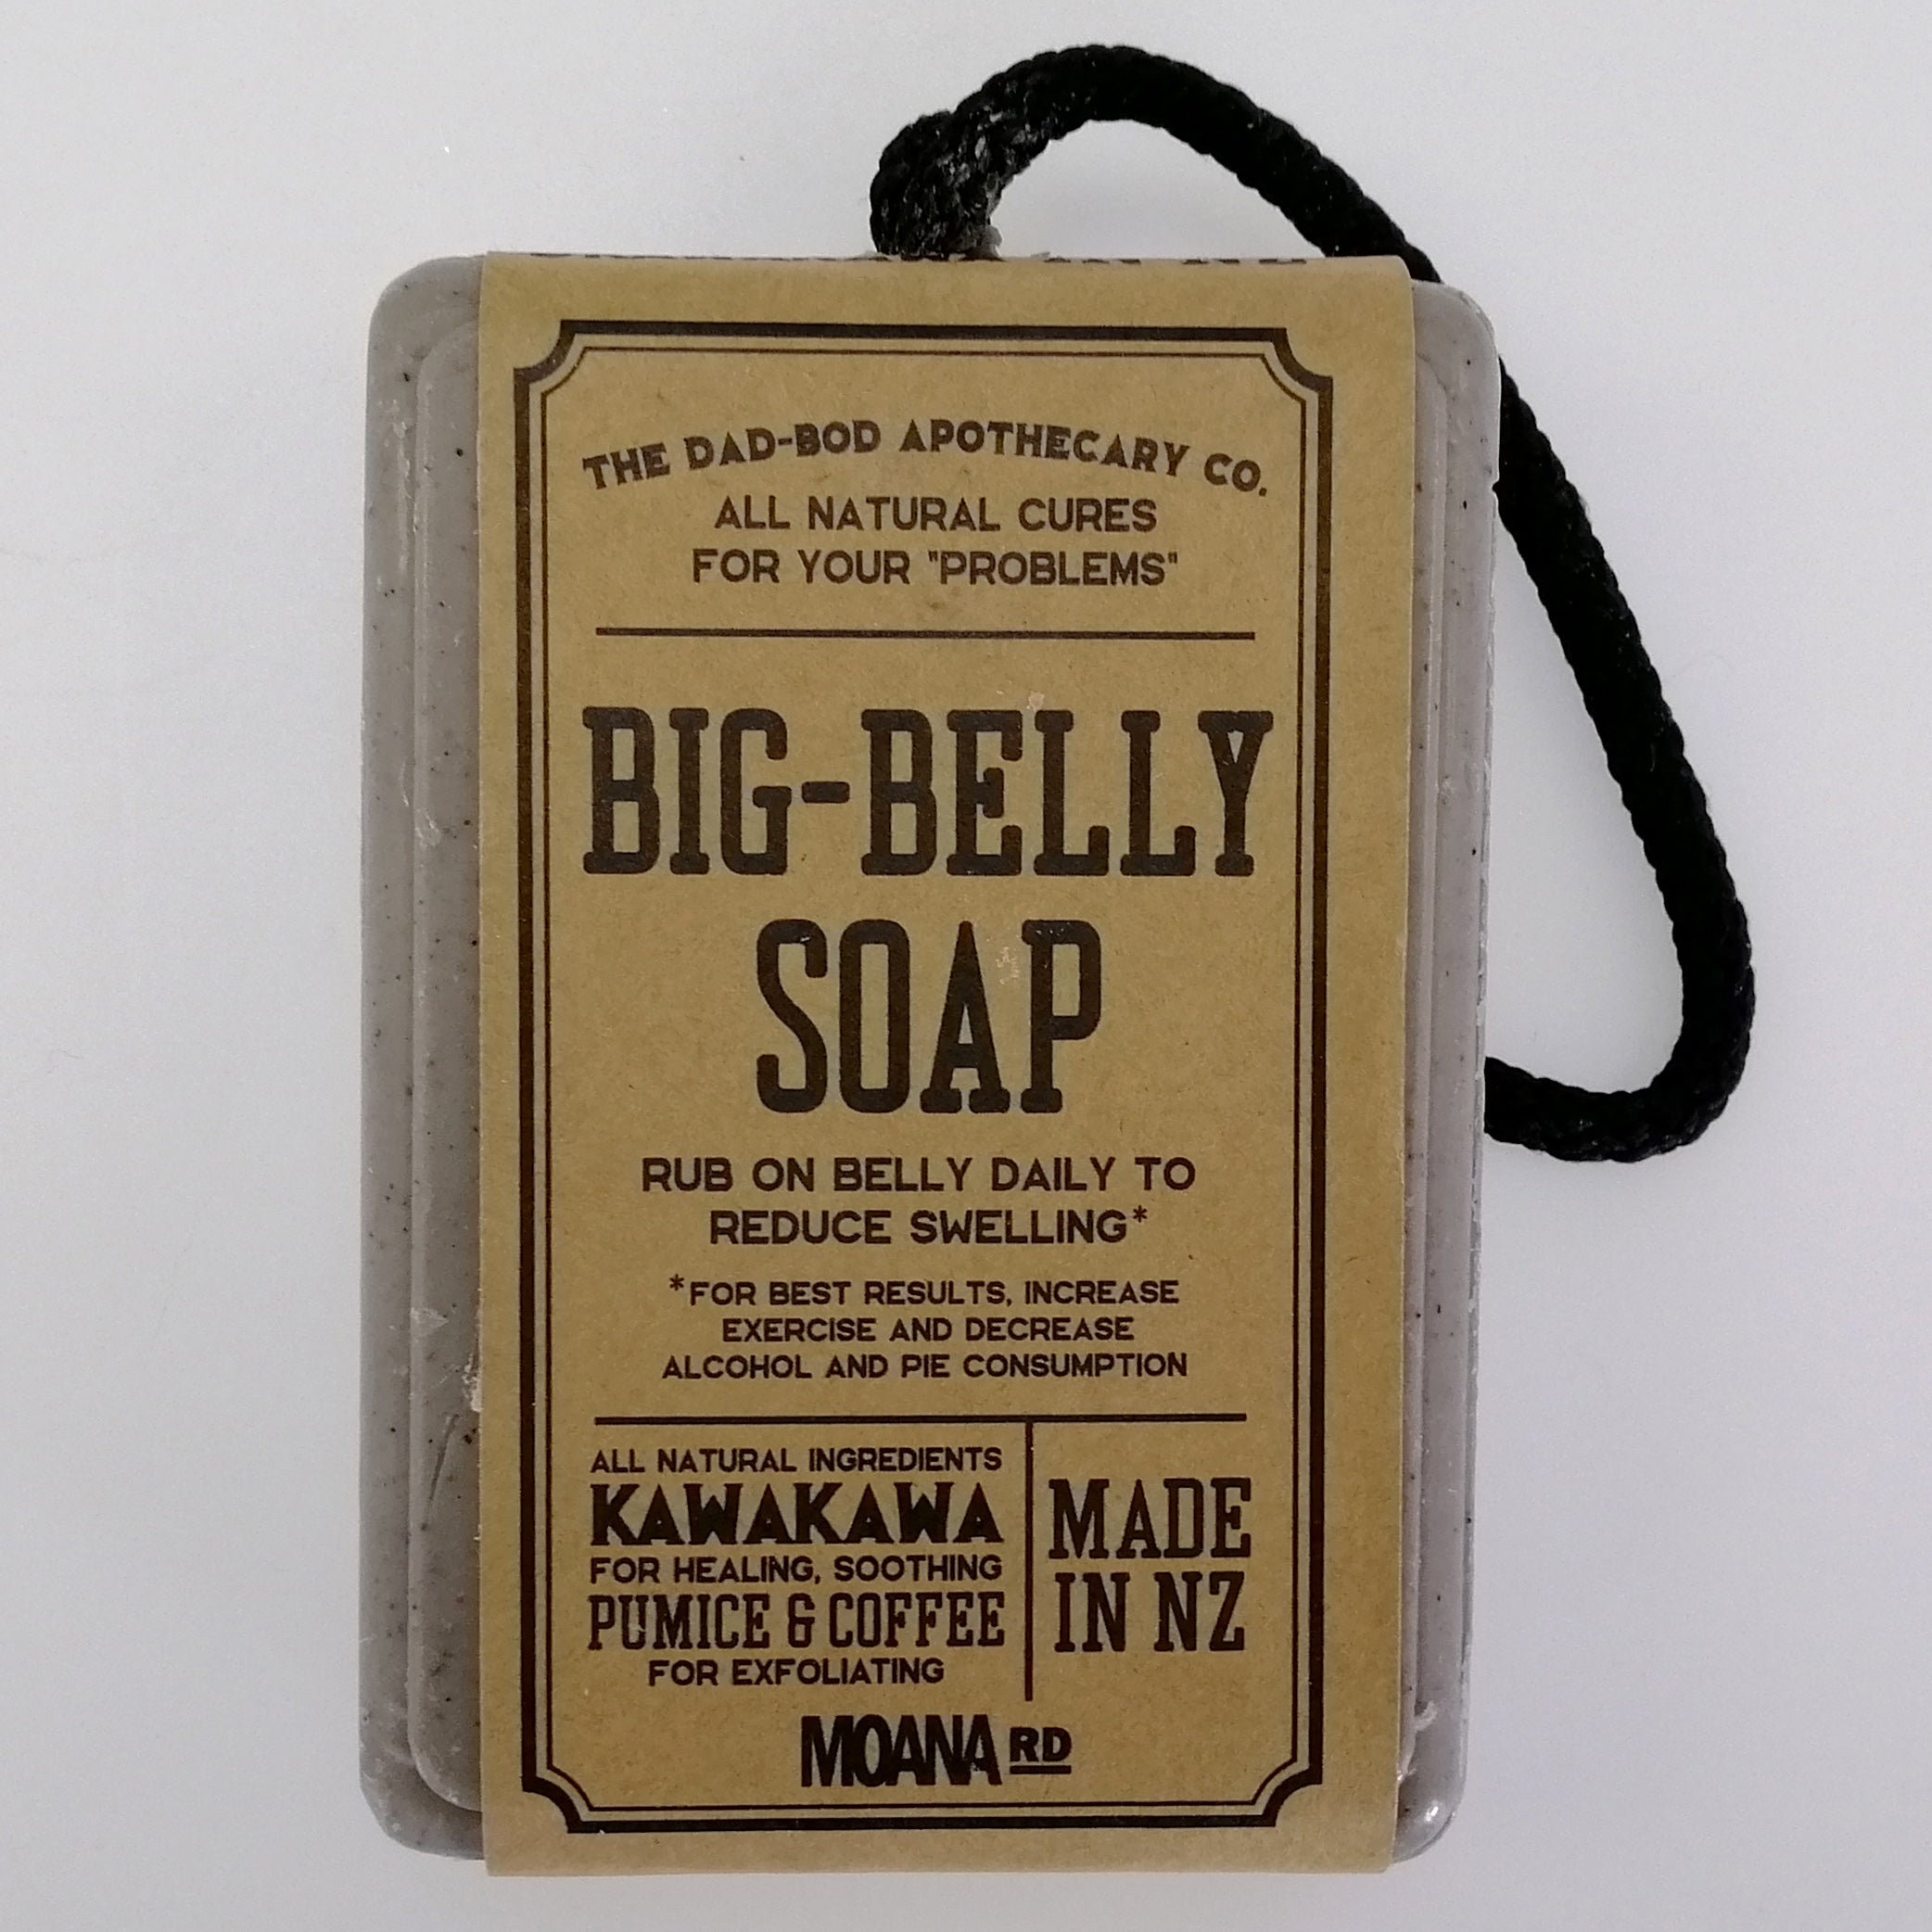 The Dad-Bod Apothecary - Big-Belly Soap